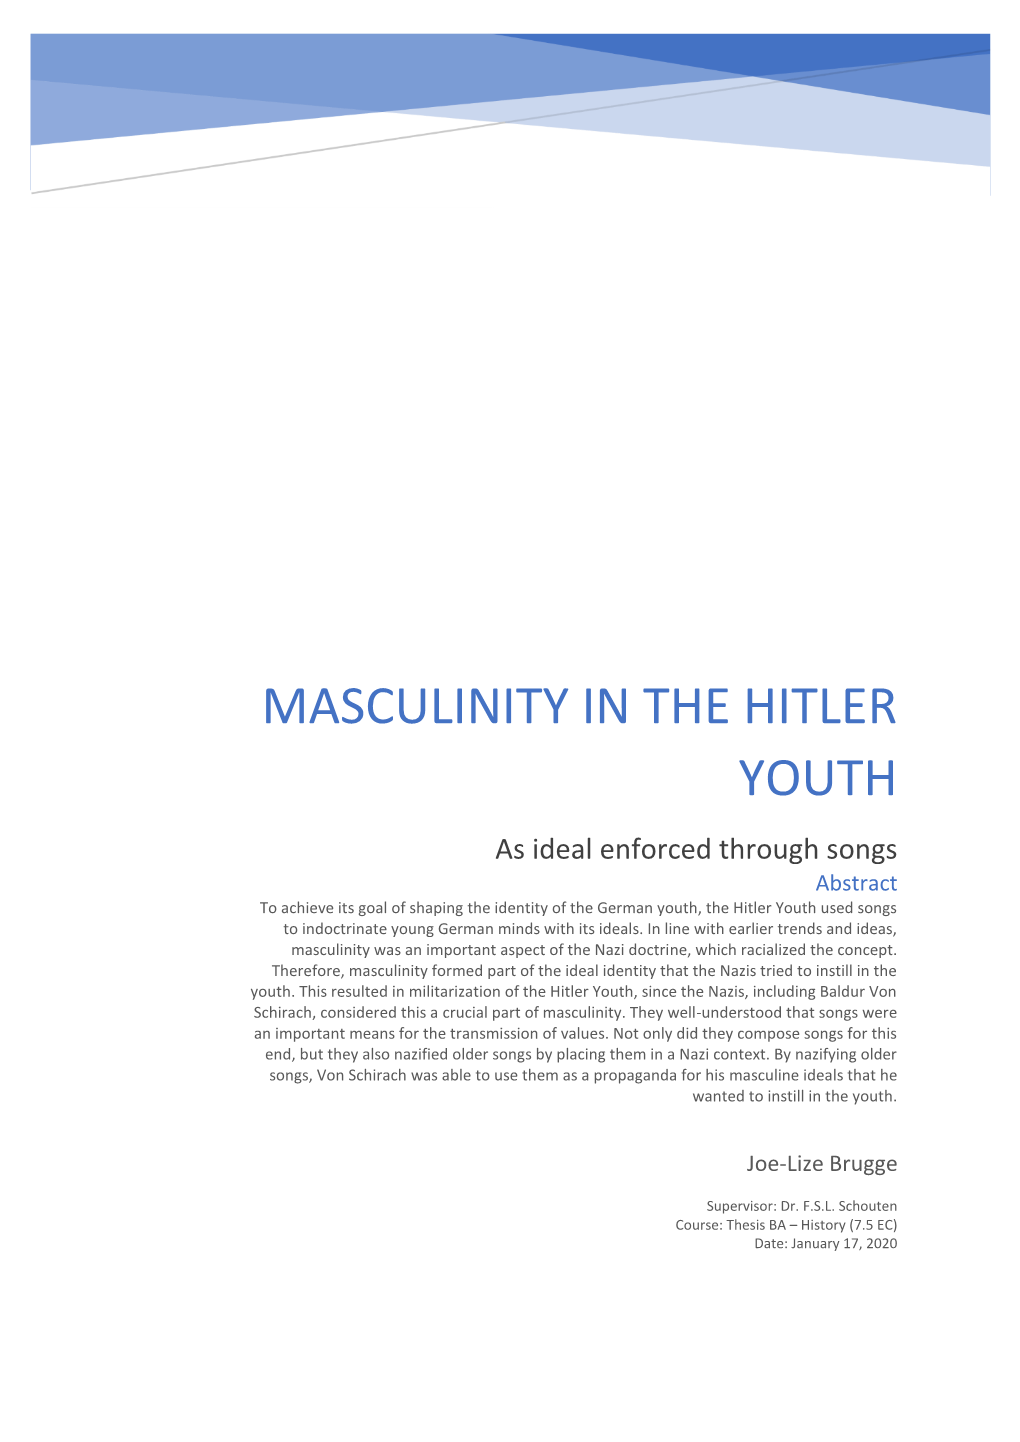 Masculinity in the Hitler Youth